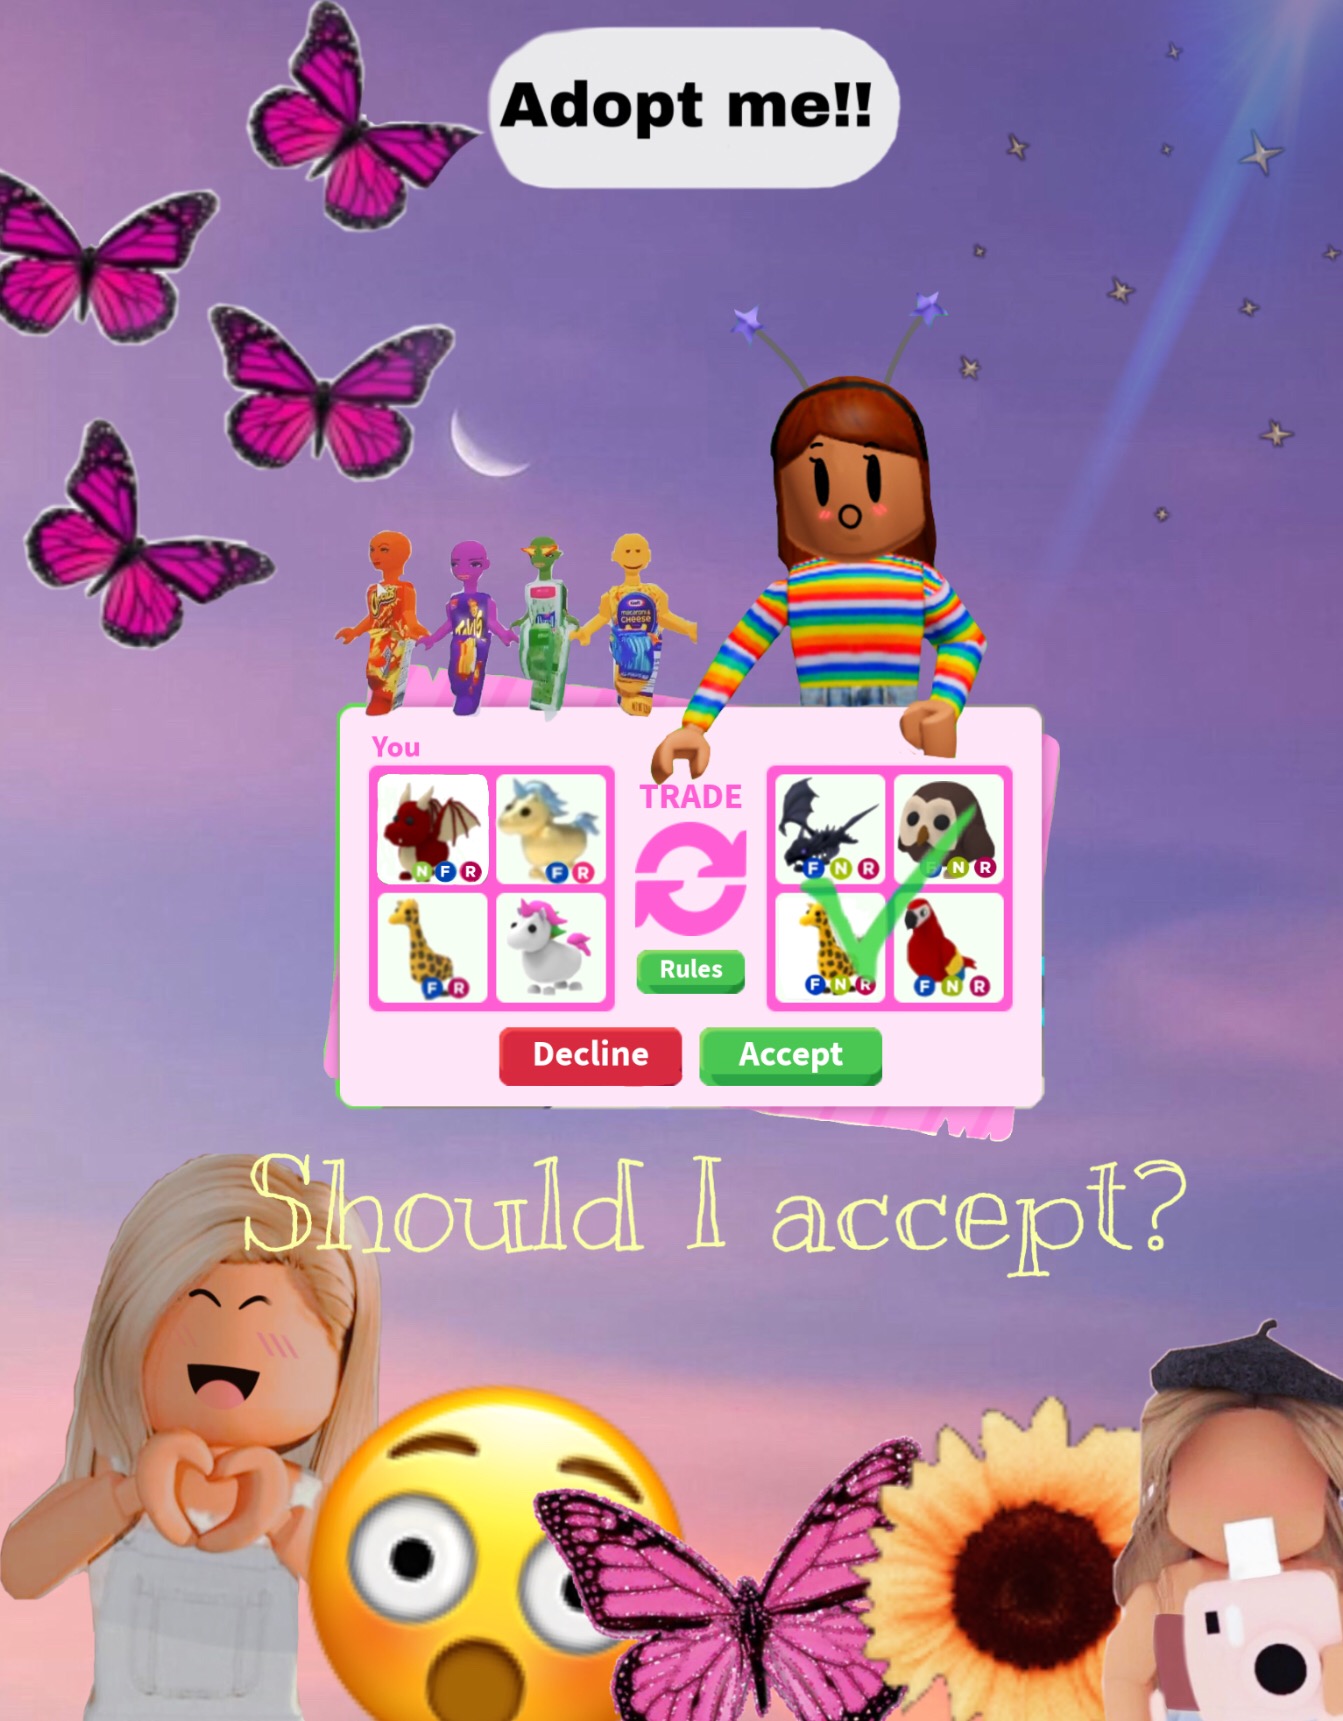 Roblox Adoptme Image By Roblox Girls - owl roblox